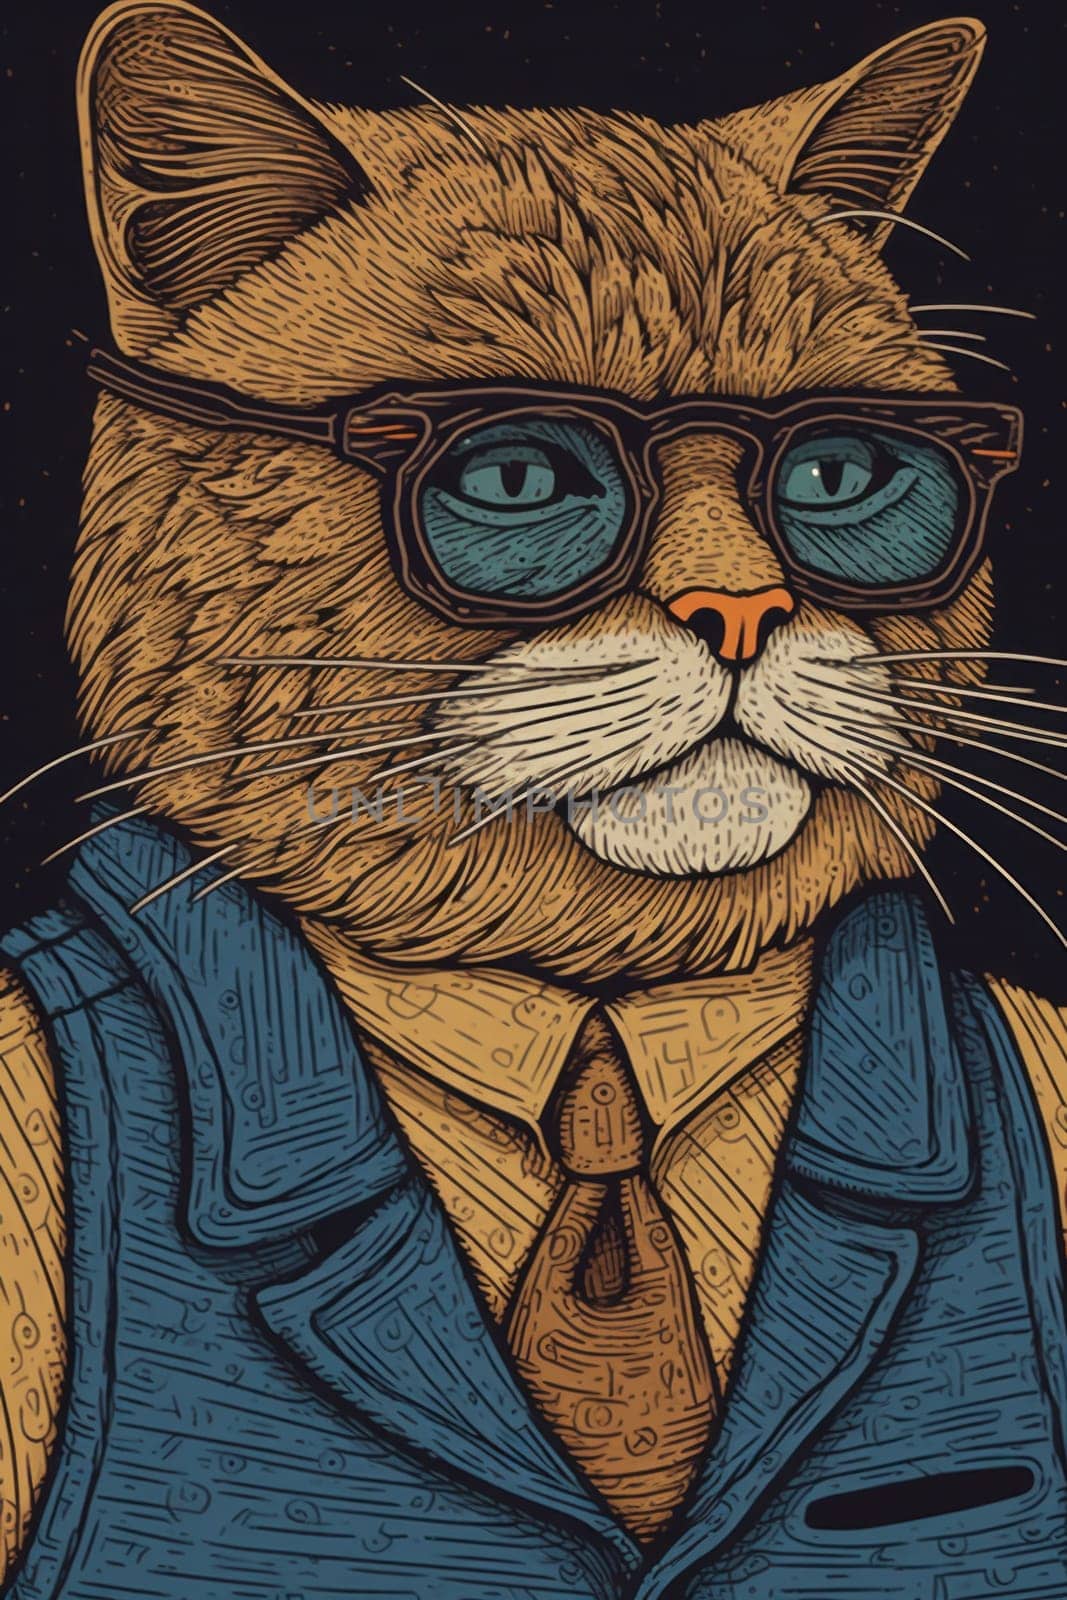 A drawing of a cat wearing a suit and tie, AI by starush